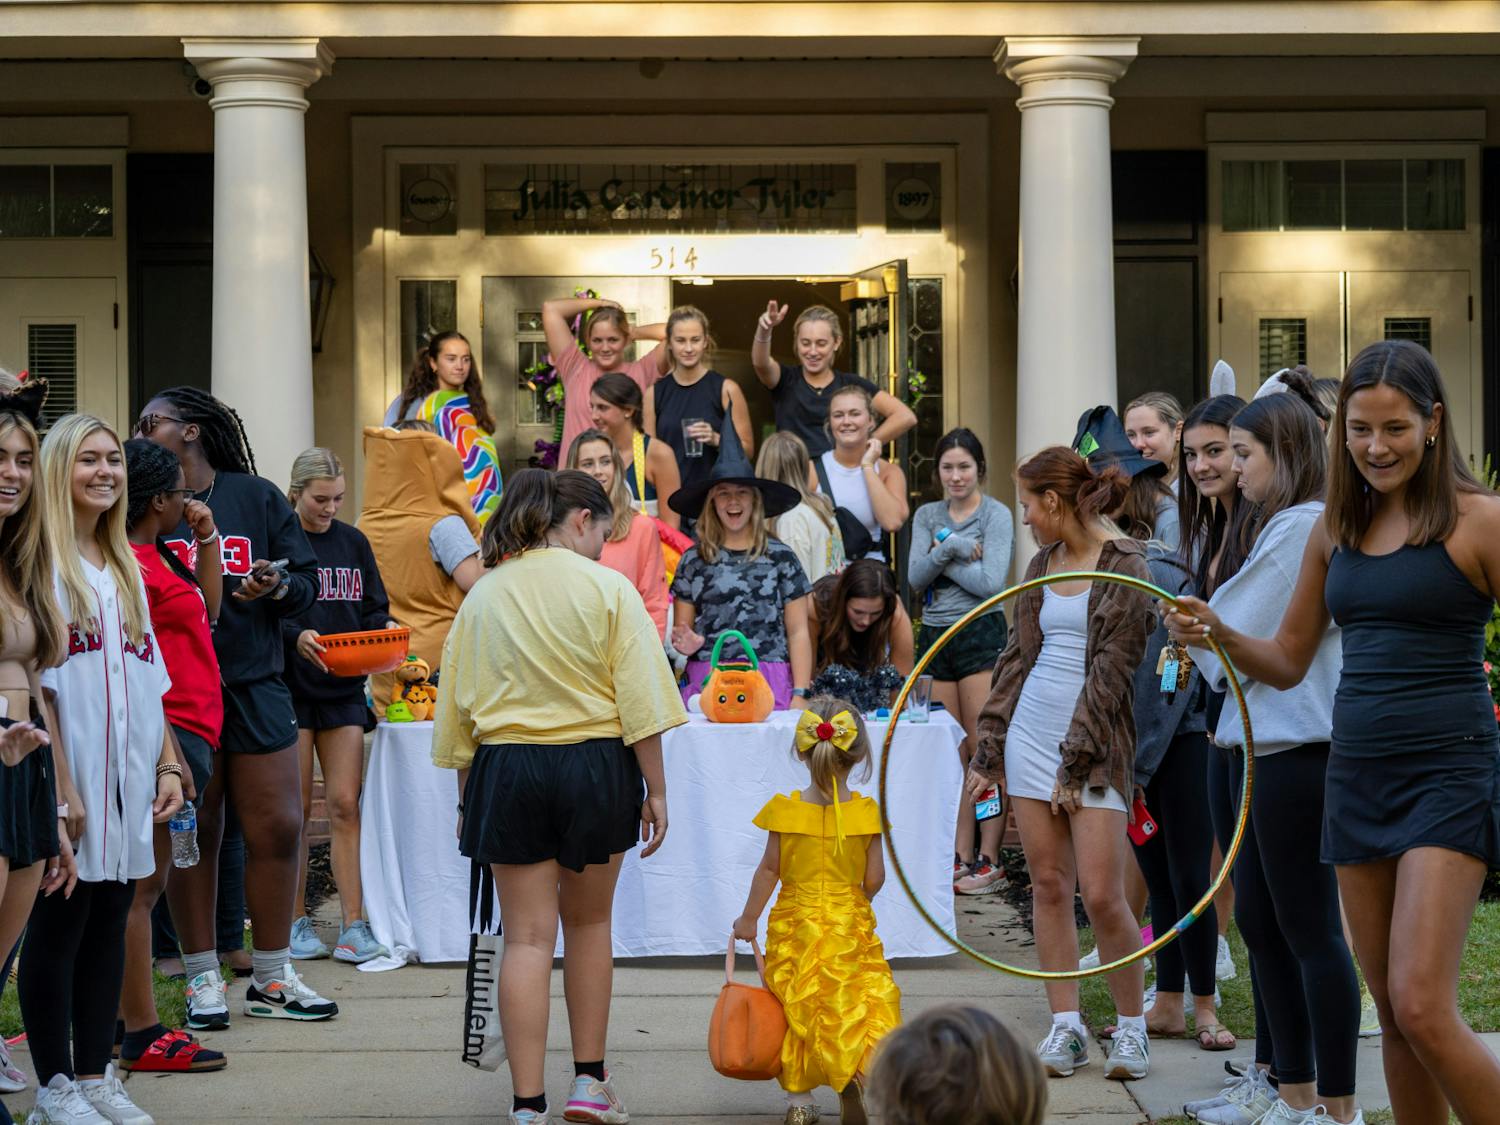 USC Greek fraternities and sororities all came together to participate in the Trick or Treat with the Greeks Halloween event on Oct. 25, 2022. The community event was hosted for the children of Columbia as a way of reaching out to the community and giving kids a night of fun activities, games and trick or treating for the Halloween season. Rachael Barkoff | The Daily Gamecock